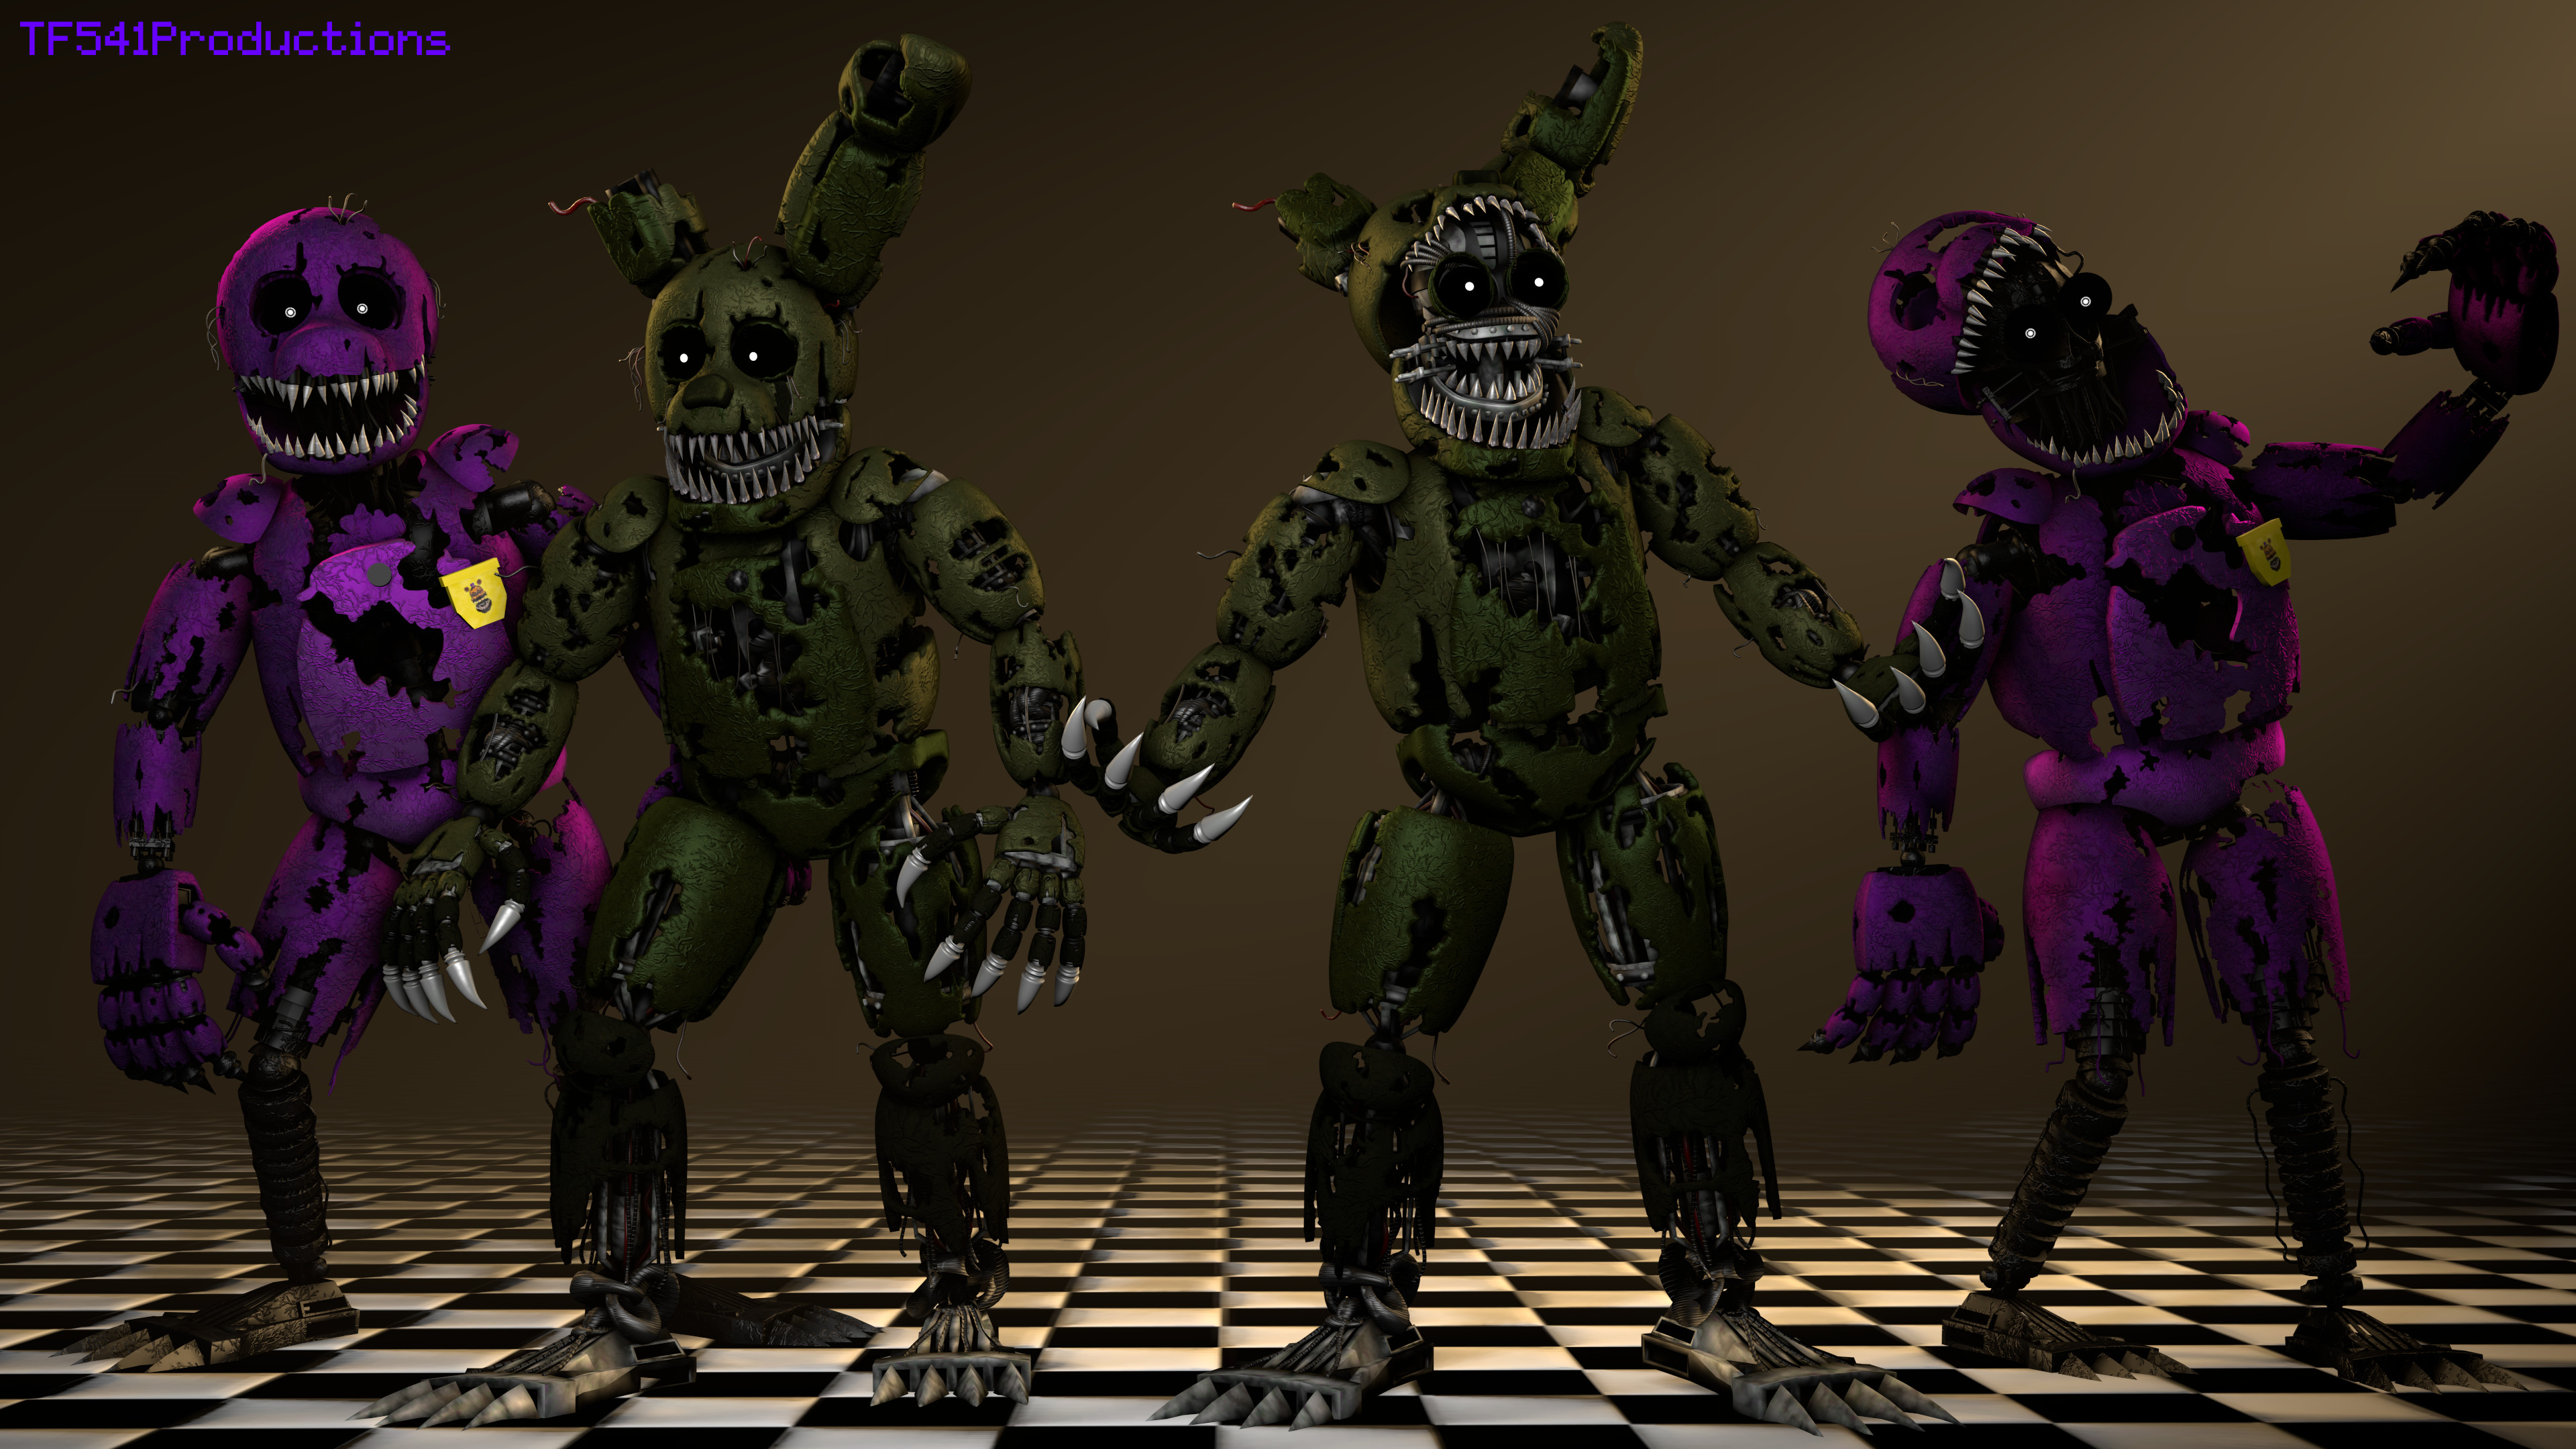 3840x2160 Nightmare Springtrap v1 by TF541Productions on DeviantArt.